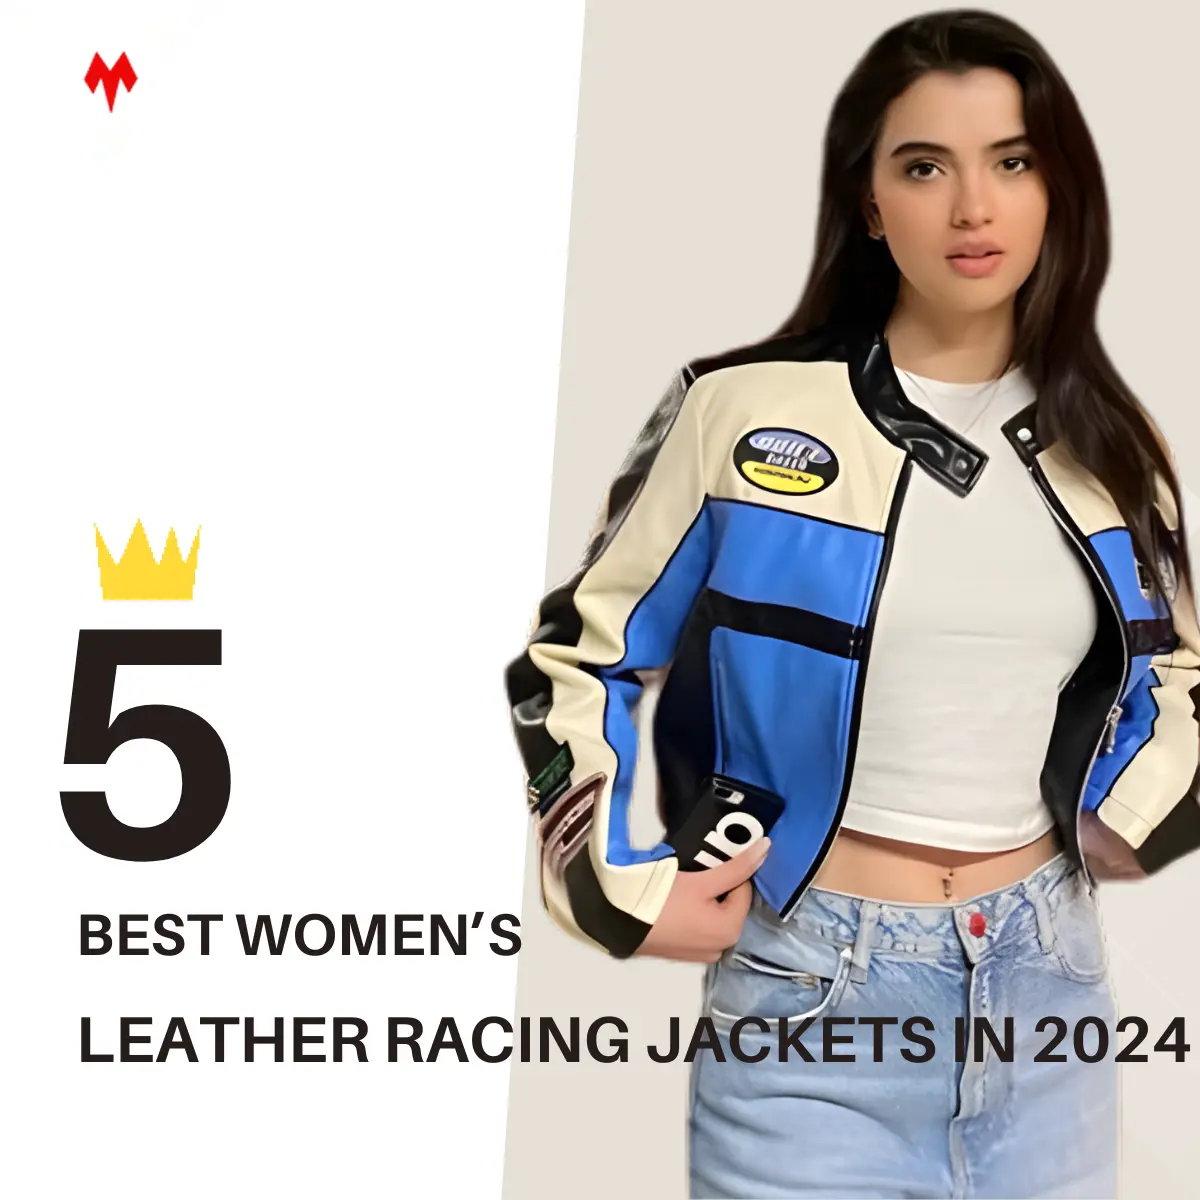 Top 5 best women's leather racing jacket in 2024 to rule on the track